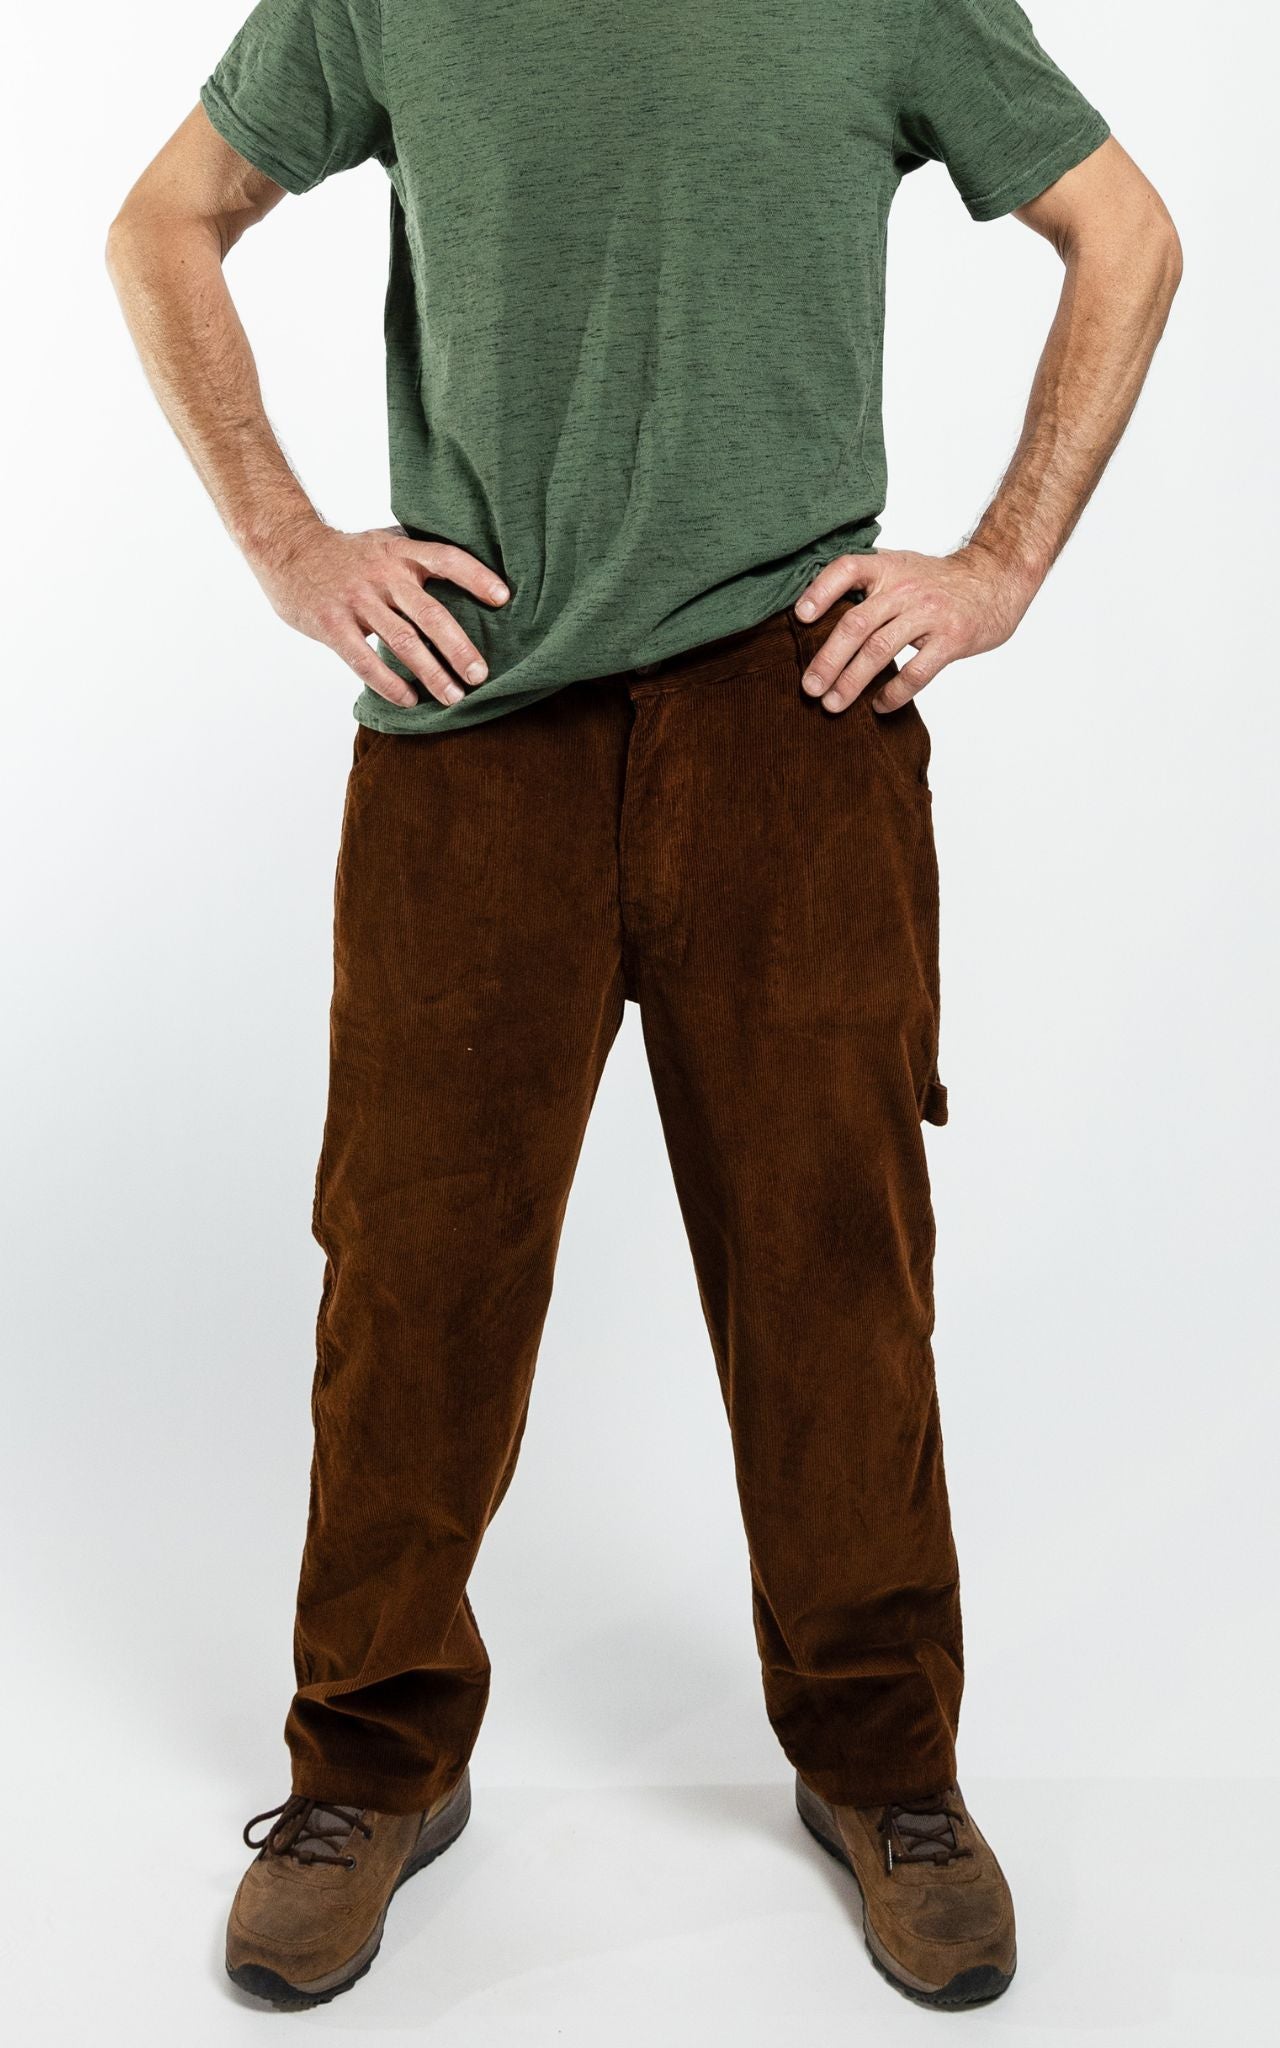 Surya Corduroy Trousers for Men made in Nepal - walnut